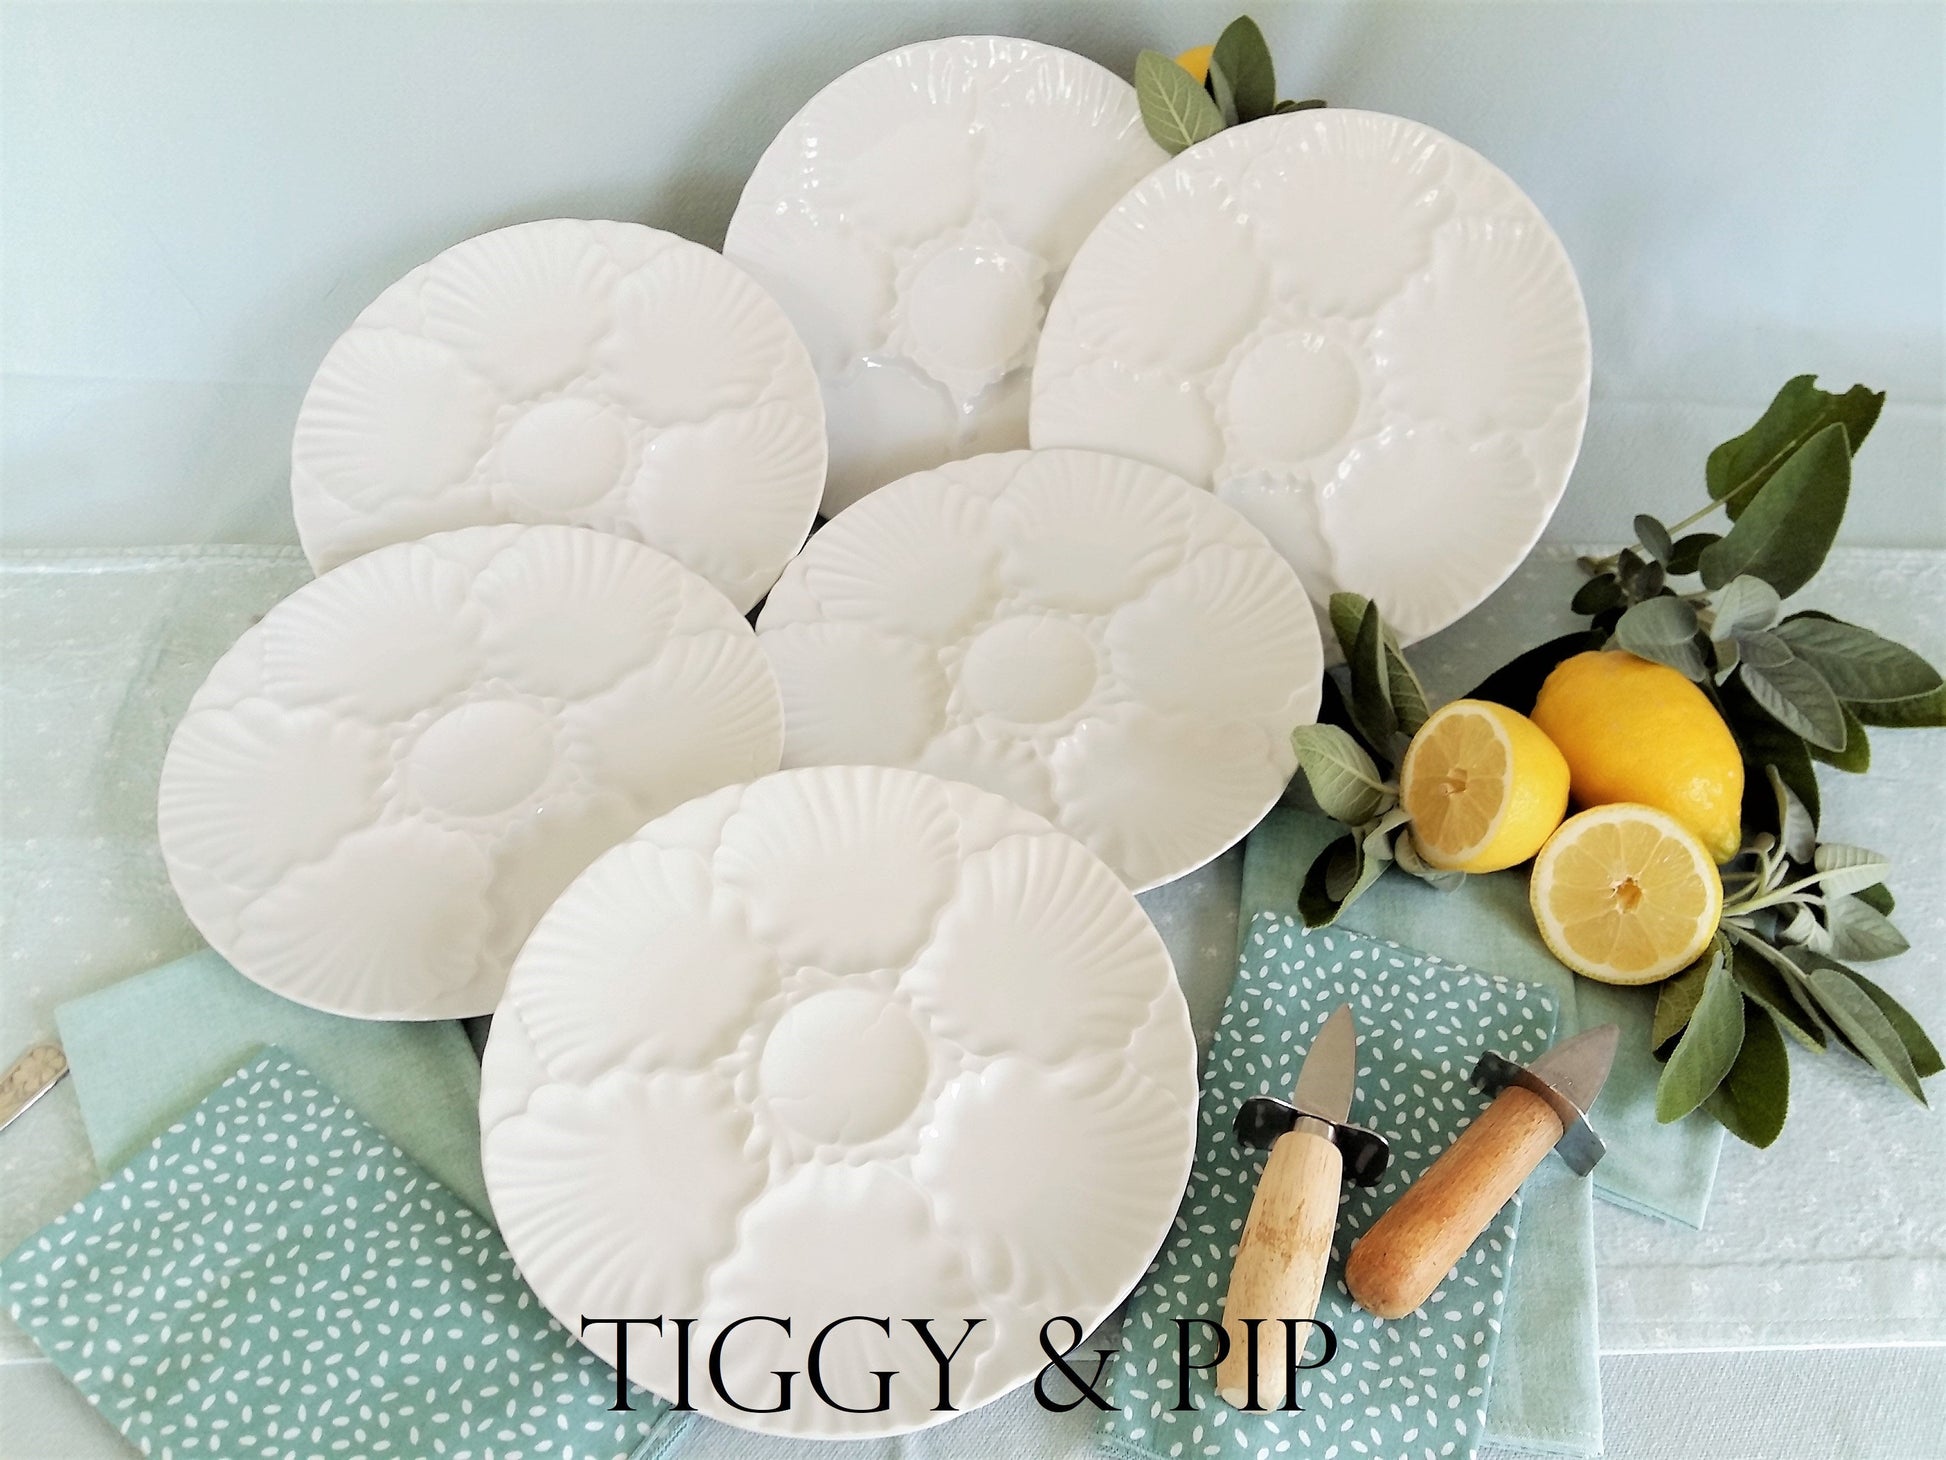 SIX Oyster Plates. Coastal Dinnerware. from Tiggy & Pip - €168.00! Shop now at Tiggy and Pip